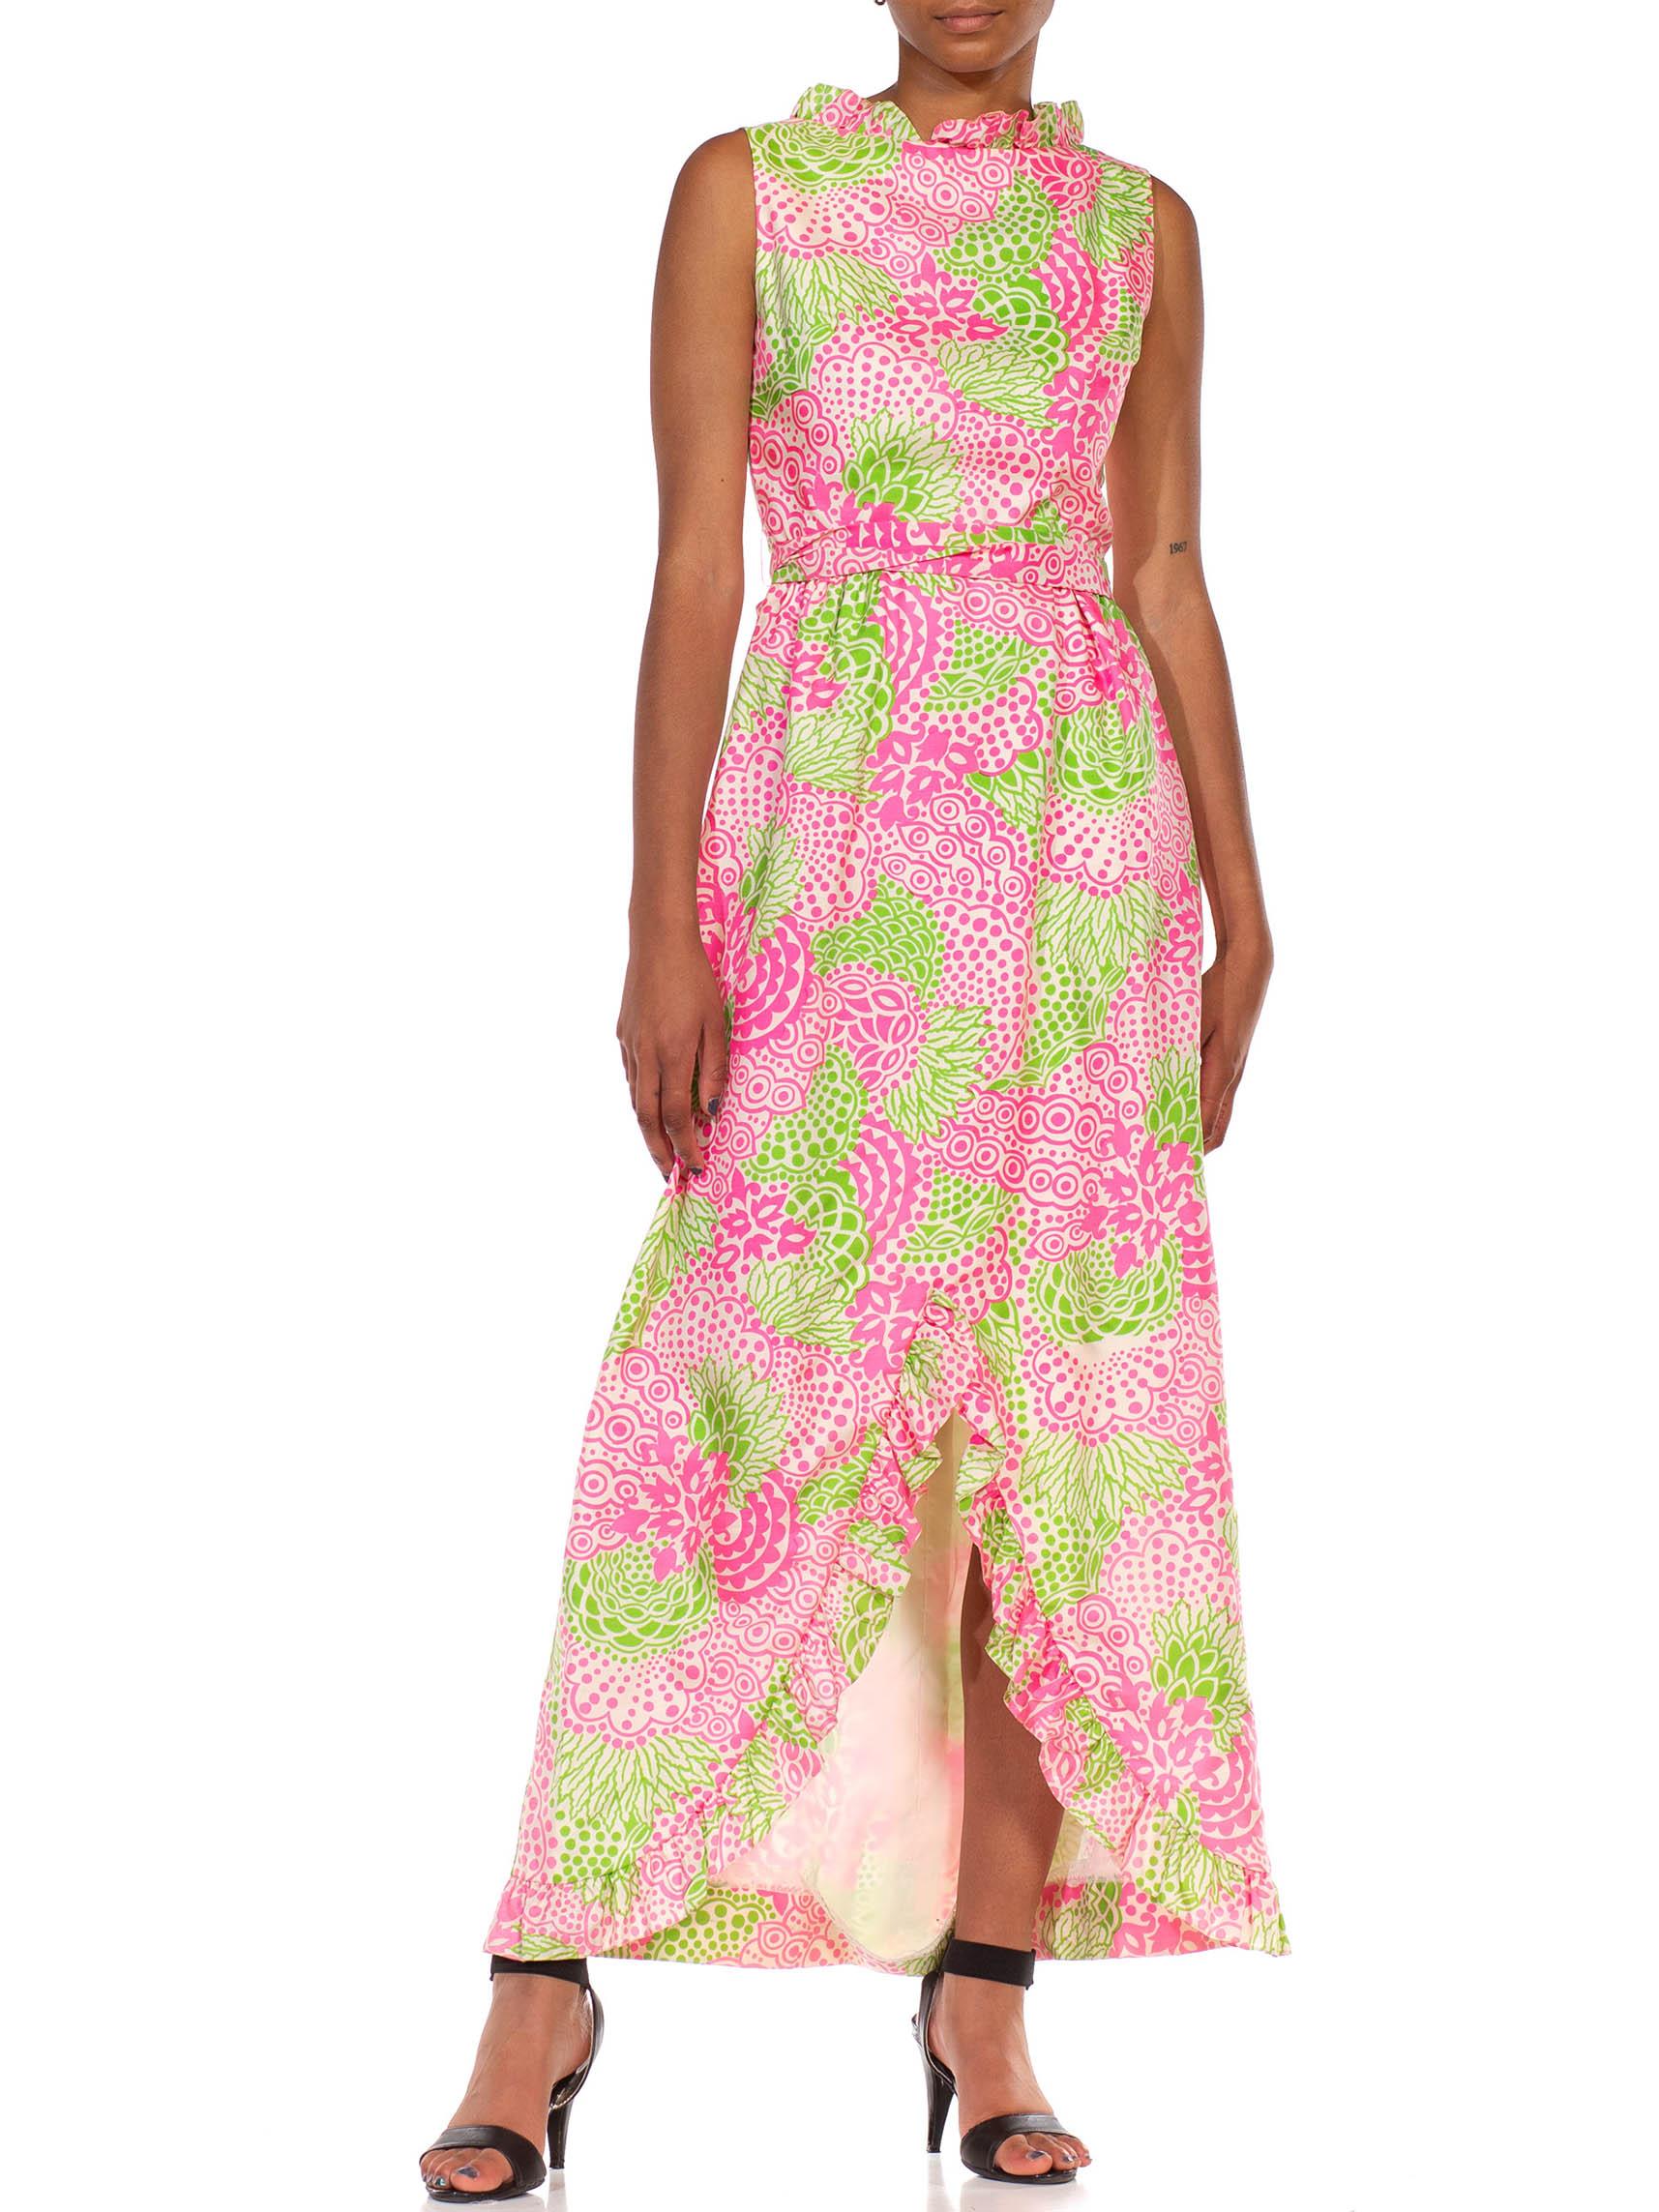 1960S LILLY PULITZER Style Pink & Green Cotton Sleeveless Maxi Dress  In Excellent Condition For Sale In New York, NY